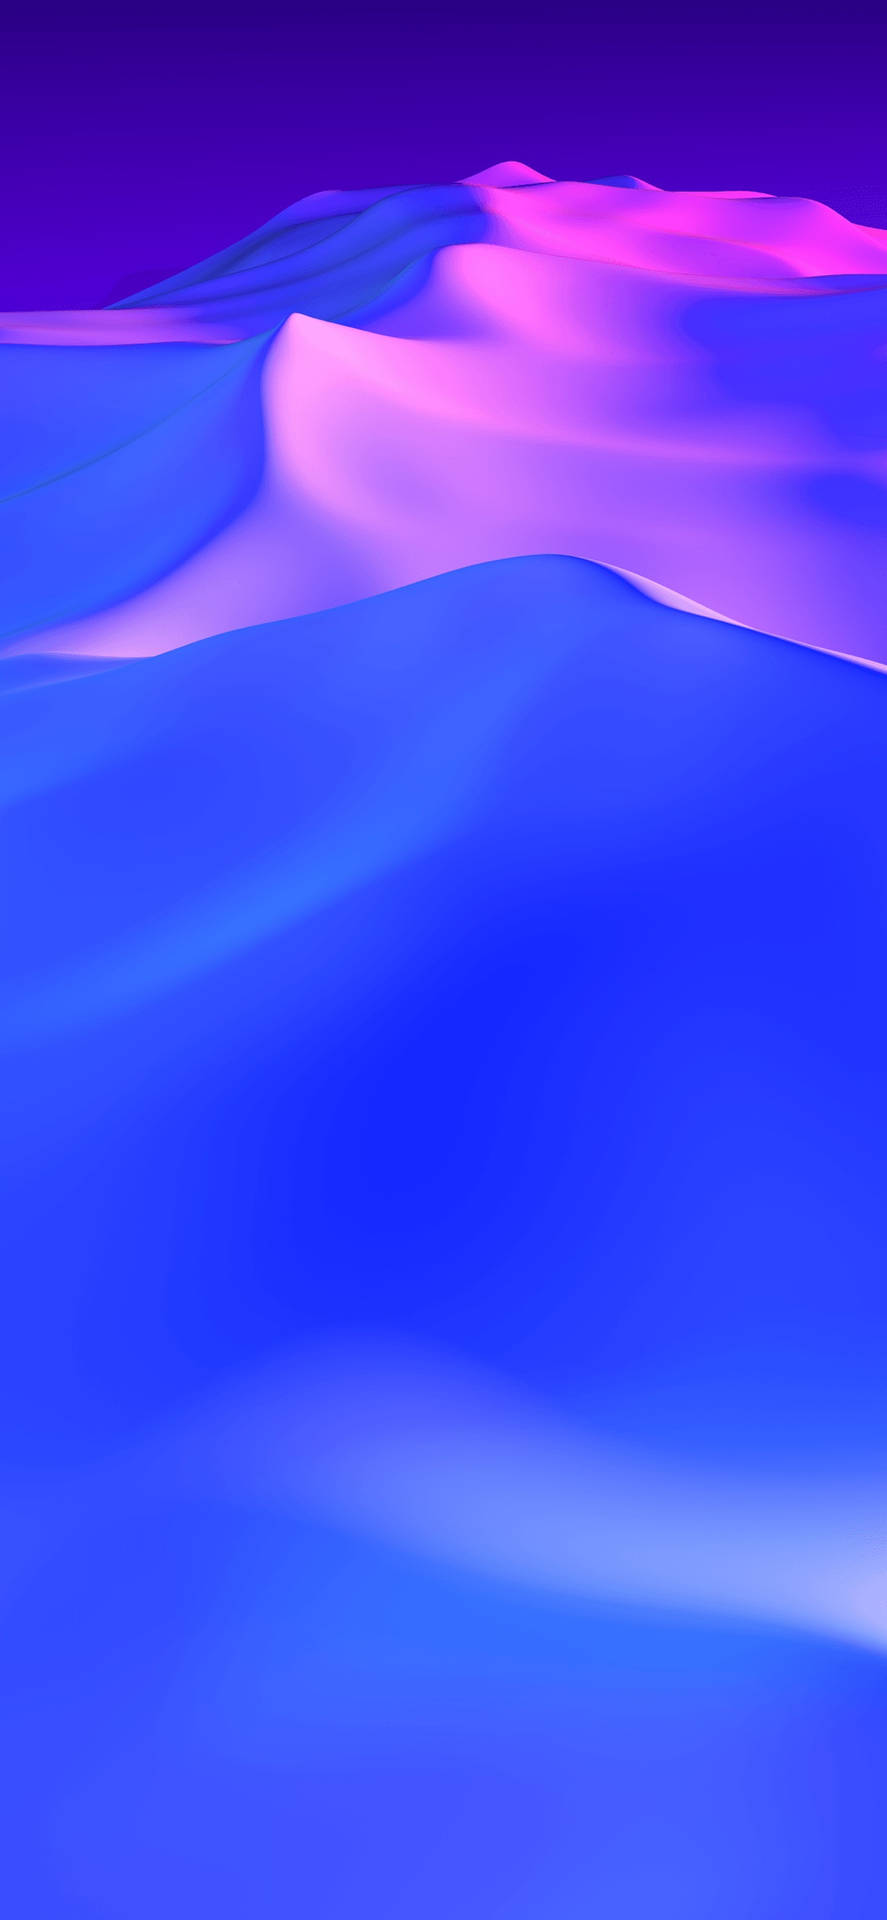 Iphone X Original Blue And Purple Mountains Background